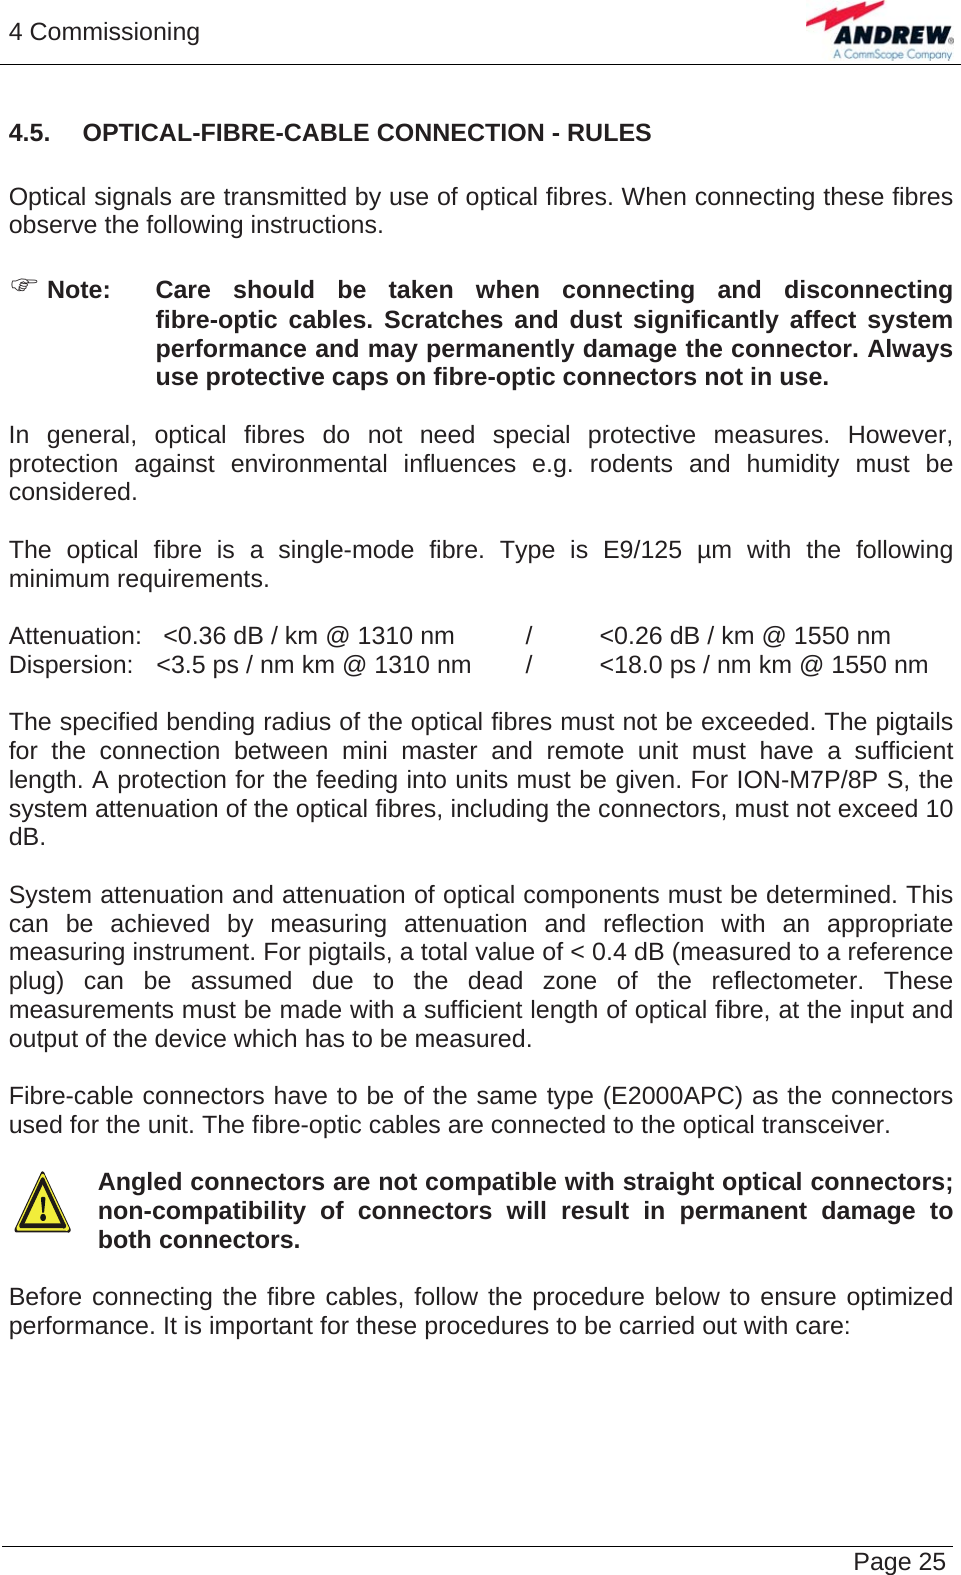 4 Commissioning   Page 254.5.  OPTICAL-FIBRE-CABLE CONNECTION - RULES  Optical signals are transmitted by use of optical fibres. When connecting these fibres observe the following instructions.   ) Note:  Care should be taken when connecting and disconnecting fibre-optic cables. Scratches and dust significantly affect system performance and may permanently damage the connector. Always use protective caps on fibre-optic connectors not in use.  In general, optical fibres do not need special protective measures. However, protection against environmental influences e.g. rodents and humidity must be considered.  The optical fibre is a single-mode fibre. Type is E9/125 µm with the following minimum requirements.  Attenuation:   &lt;0.36 dB / km @ 1310 nm  /  &lt;0.26 dB / km @ 1550 nm Dispersion:  &lt;3.5 ps / nm km @ 1310 nm  /  &lt;18.0 ps / nm km @ 1550 nm  The specified bending radius of the optical fibres must not be exceeded. The pigtails for the connection between mini master and remote unit must have a sufficient length. A protection for the feeding into units must be given. For ION-M7P/8P S, the system attenuation of the optical fibres, including the connectors, must not exceed 10 dB.  System attenuation and attenuation of optical components must be determined. This can be achieved by measuring attenuation and reflection with an appropriate measuring instrument. For pigtails, a total value of &lt; 0.4 dB (measured to a reference plug) can be assumed due to the dead zone of the reflectometer. These measurements must be made with a sufficient length of optical fibre, at the input and output of the device which has to be measured.  Fibre-cable connectors have to be of the same type (E2000APC) as the connectors used for the unit. The fibre-optic cables are connected to the optical transceiver.  Angled connectors are not compatible with straight optical connectors; non-compatibility of connectors will result in permanent damage to both connectors.  Before connecting the fibre cables, follow the procedure below to ensure optimized performance. It is important for these procedures to be carried out with care:  